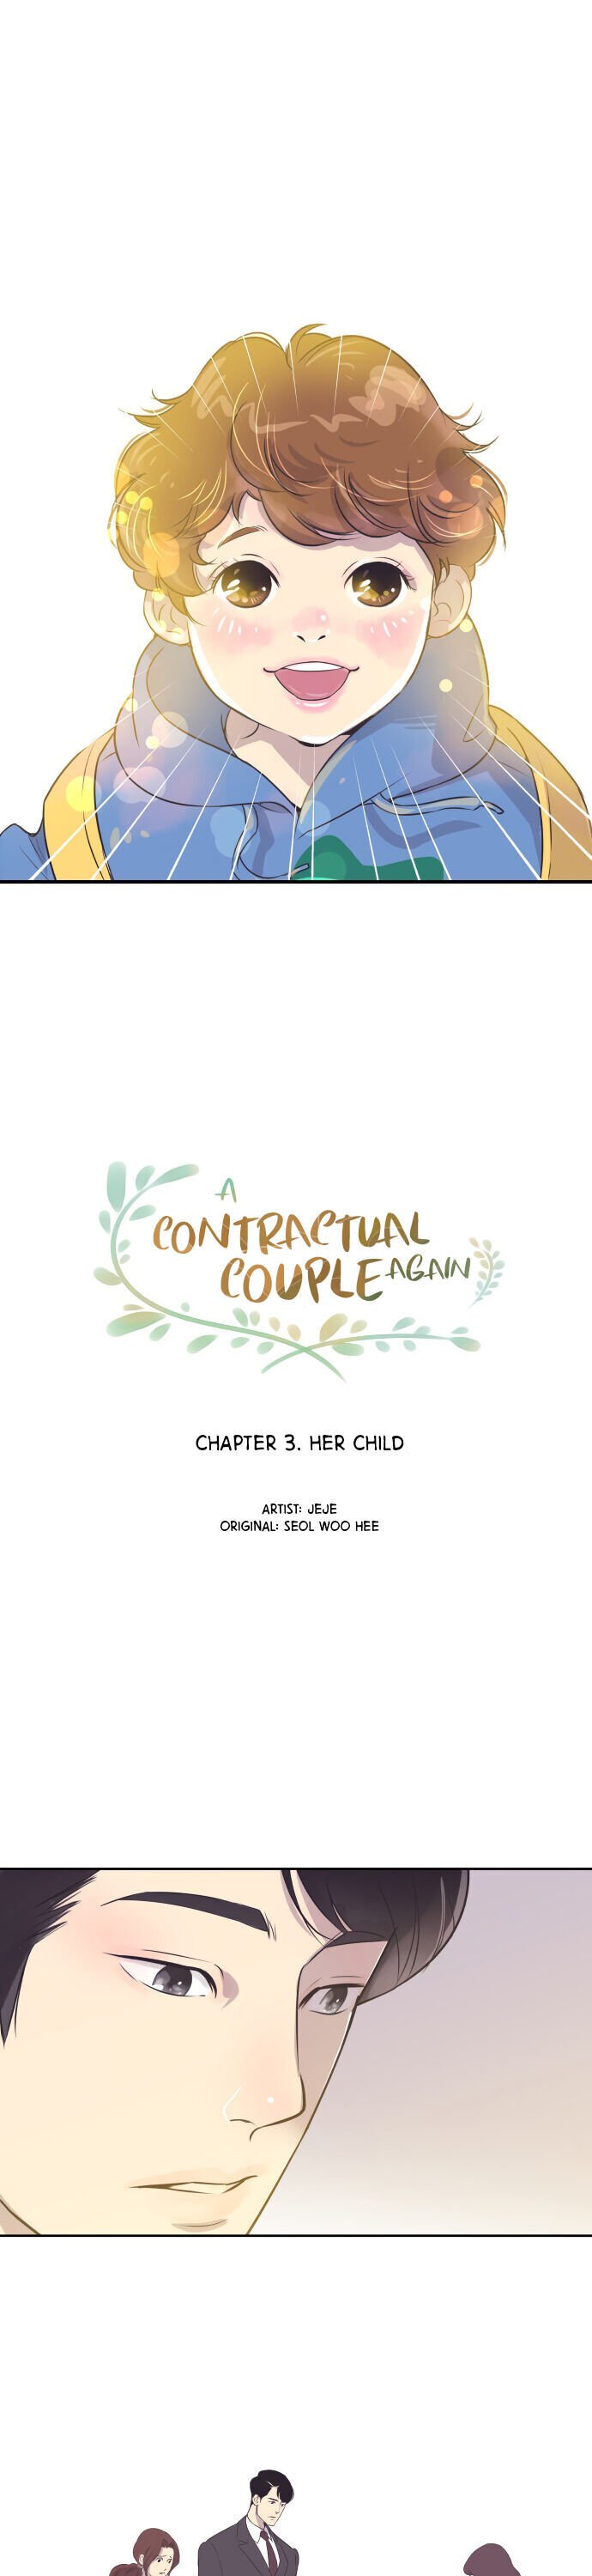 A Contractual Couple Again chapter 3